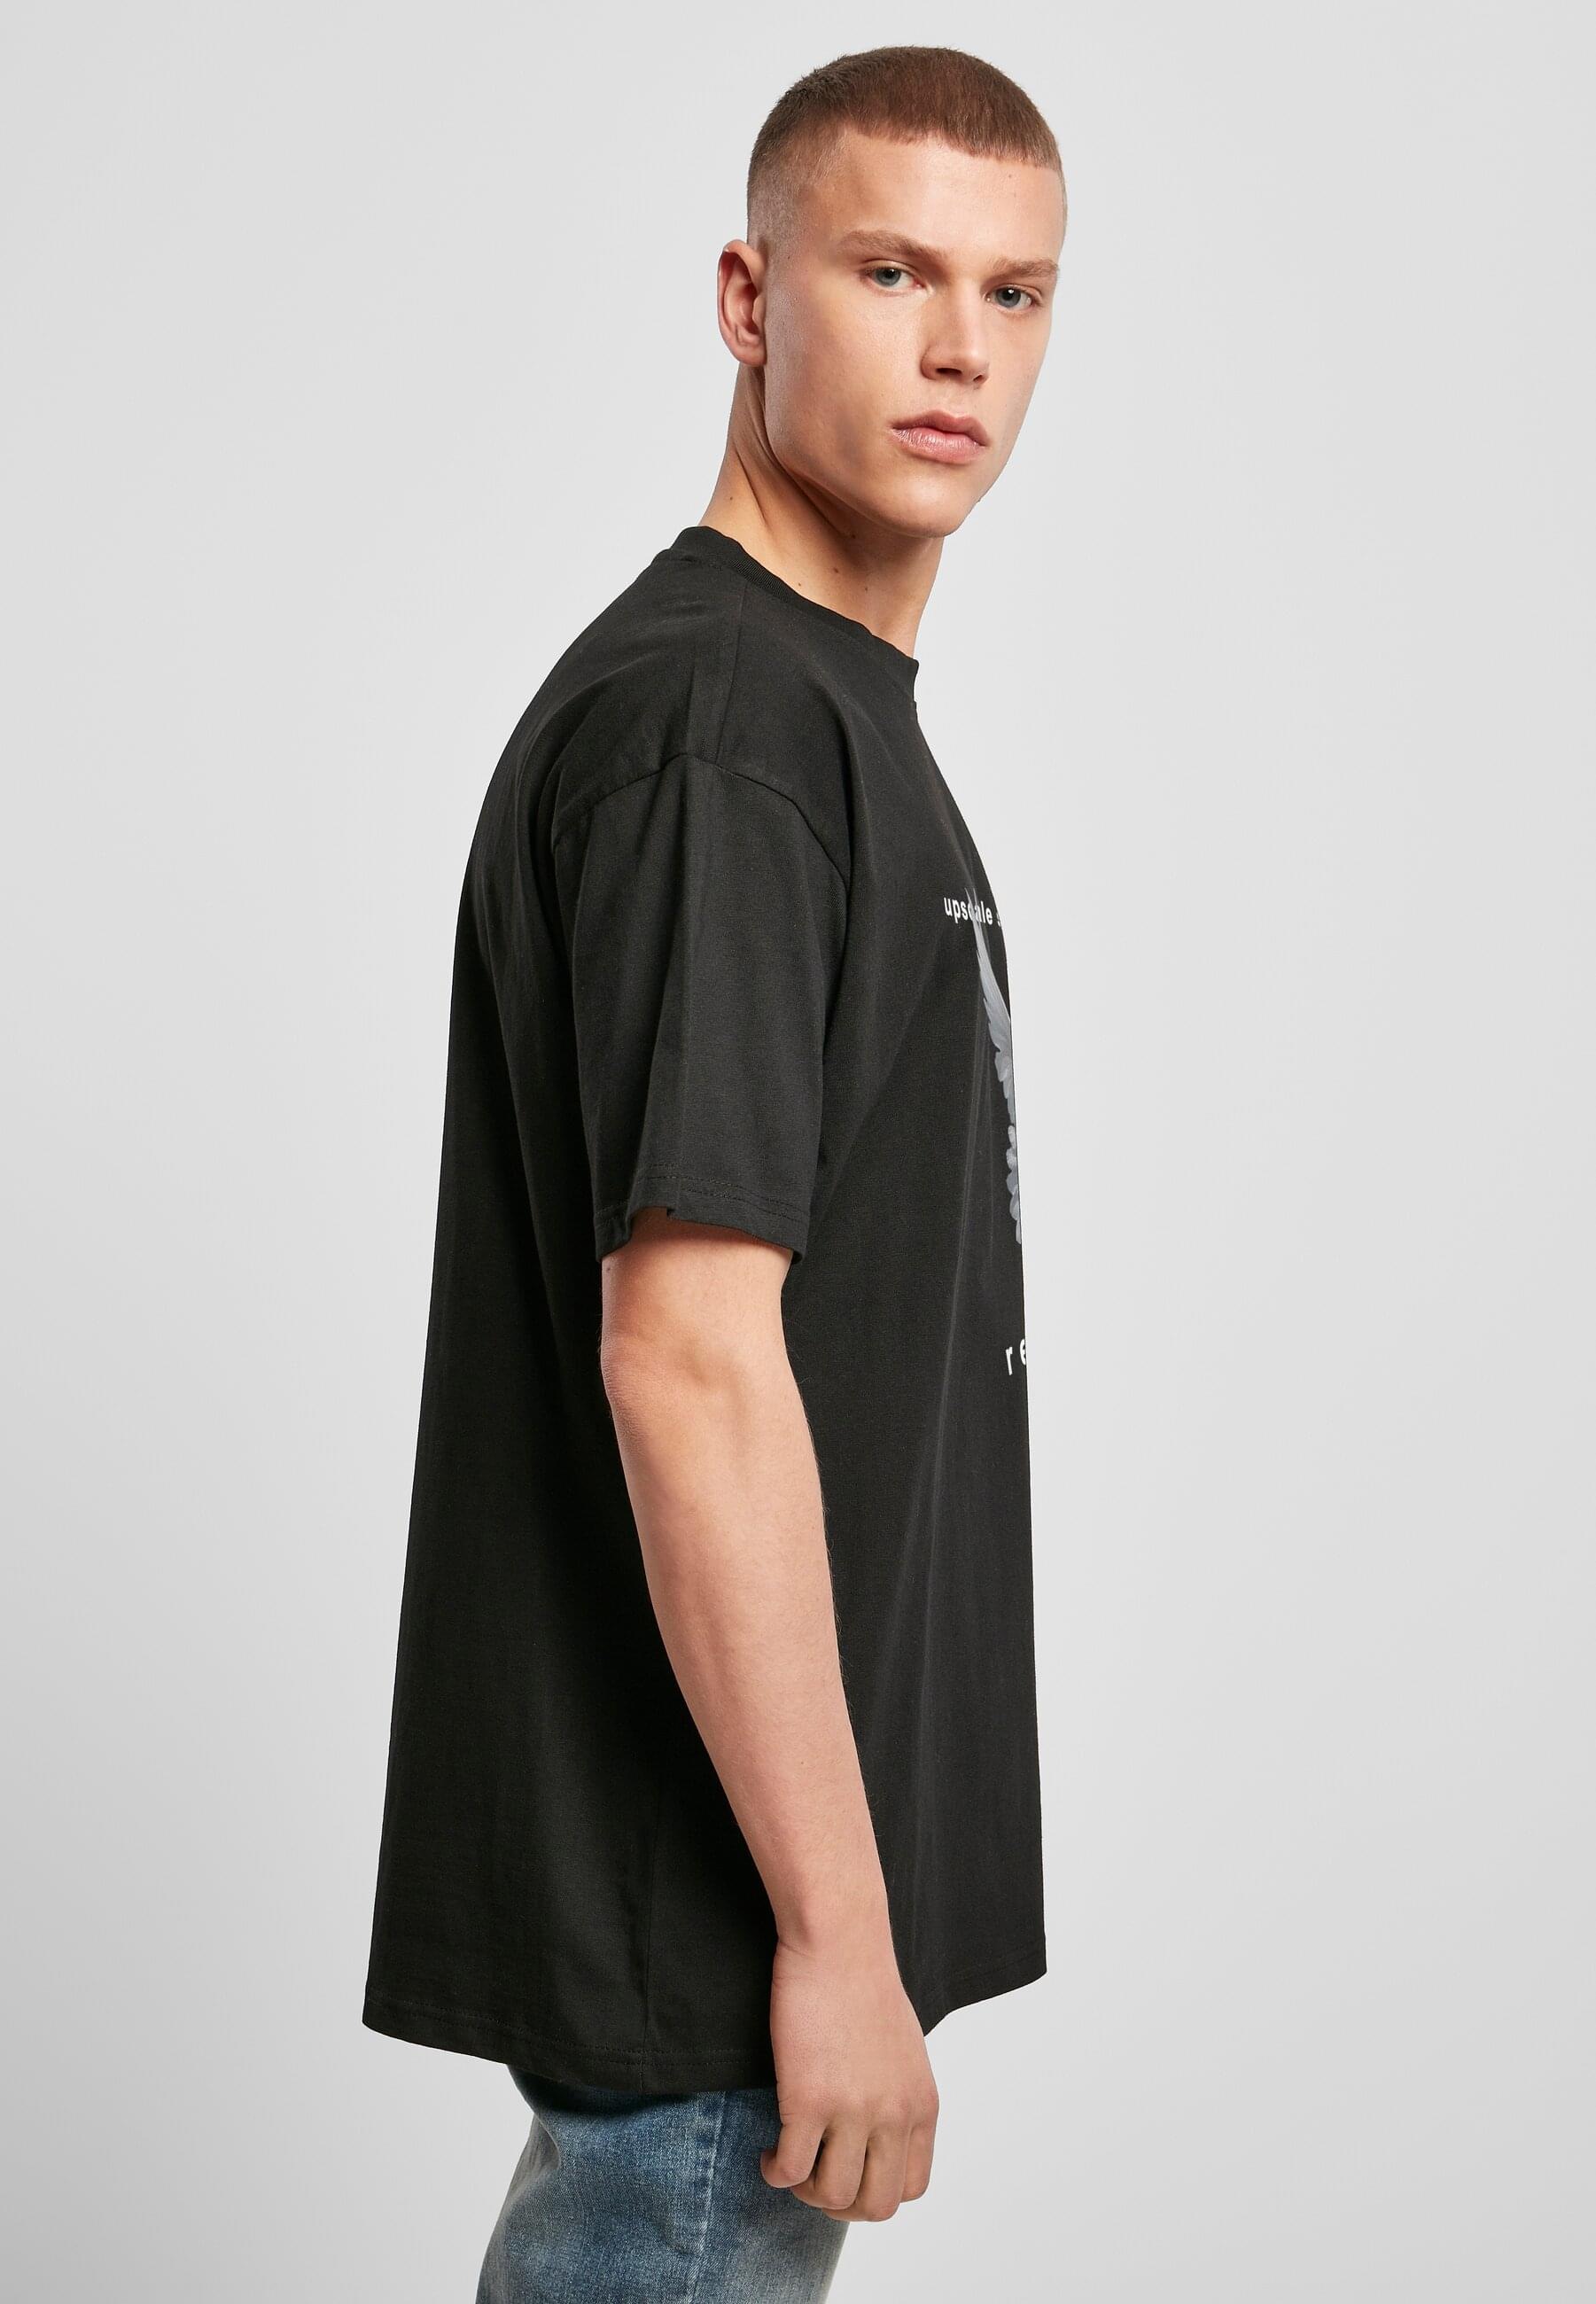 | BAUR by kaufen Upscale fly Ready Mister tlg.) to T-Shirt Oversize Tee (1 »Unisex ▷ Tee«,